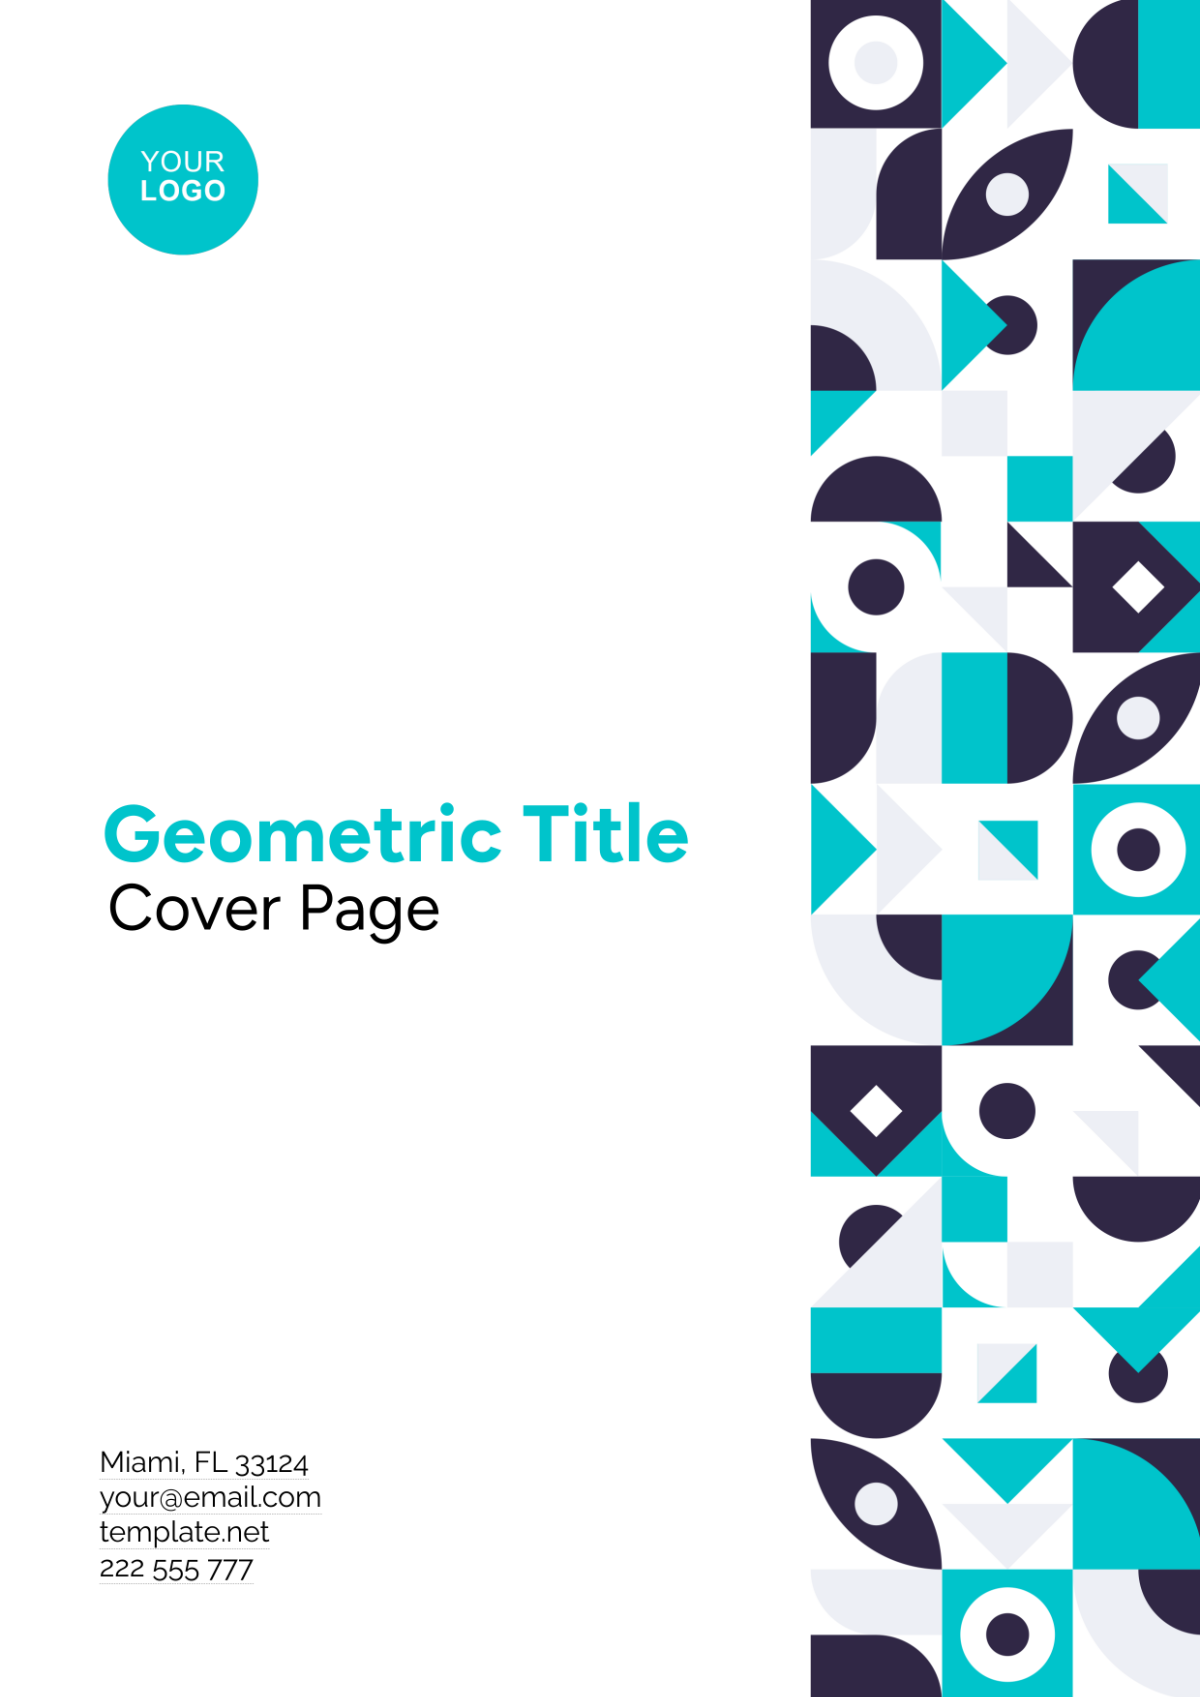 Geometric Title Cover Page